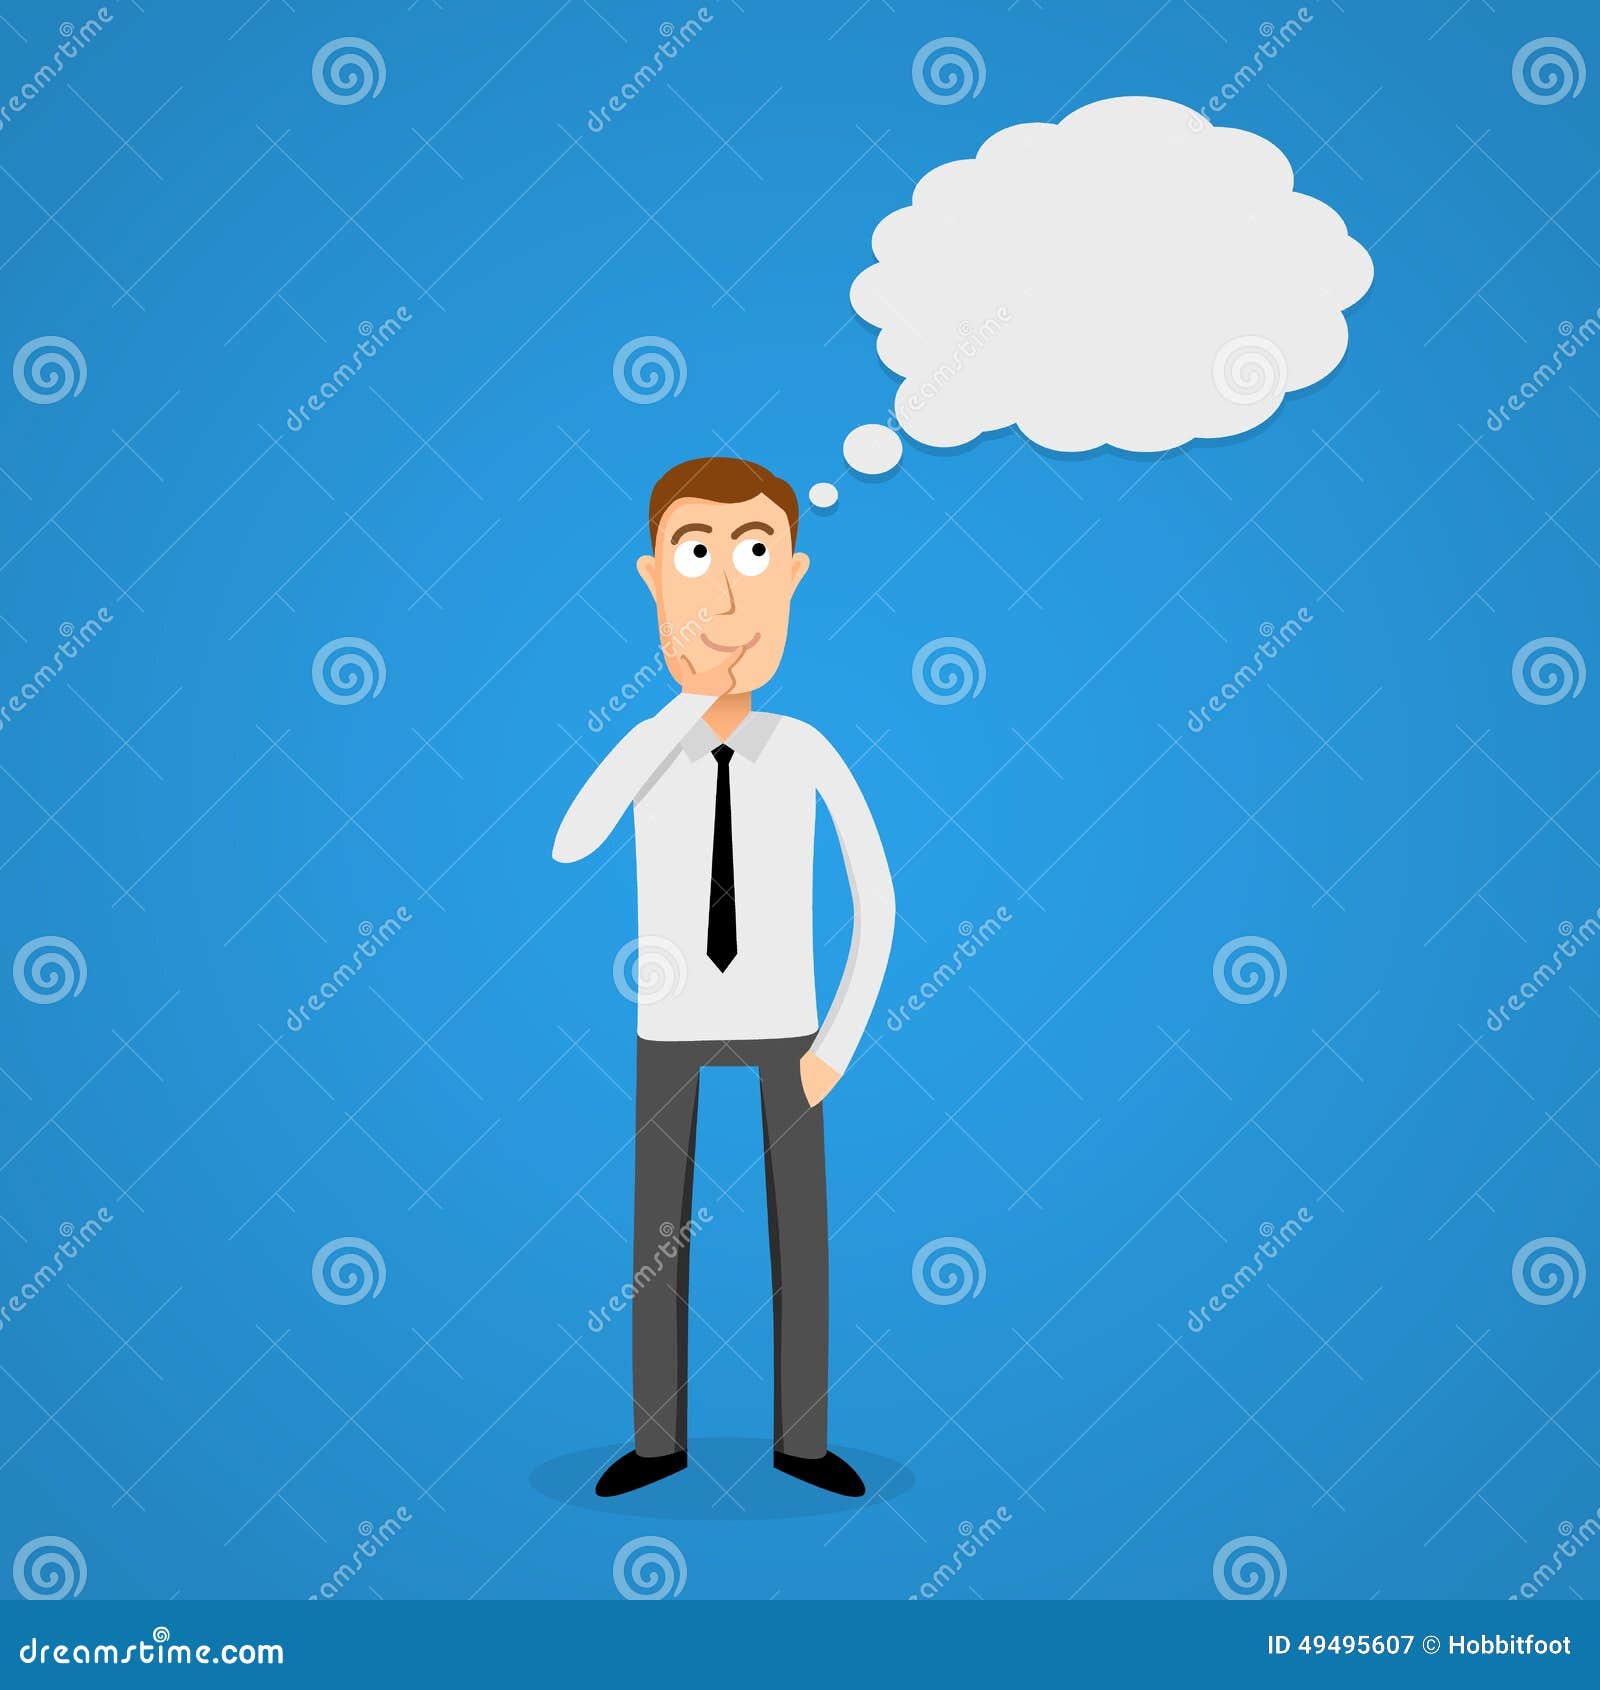 Thinking Cloud And Cartoon Business Man. Stock Vector - Illustration of